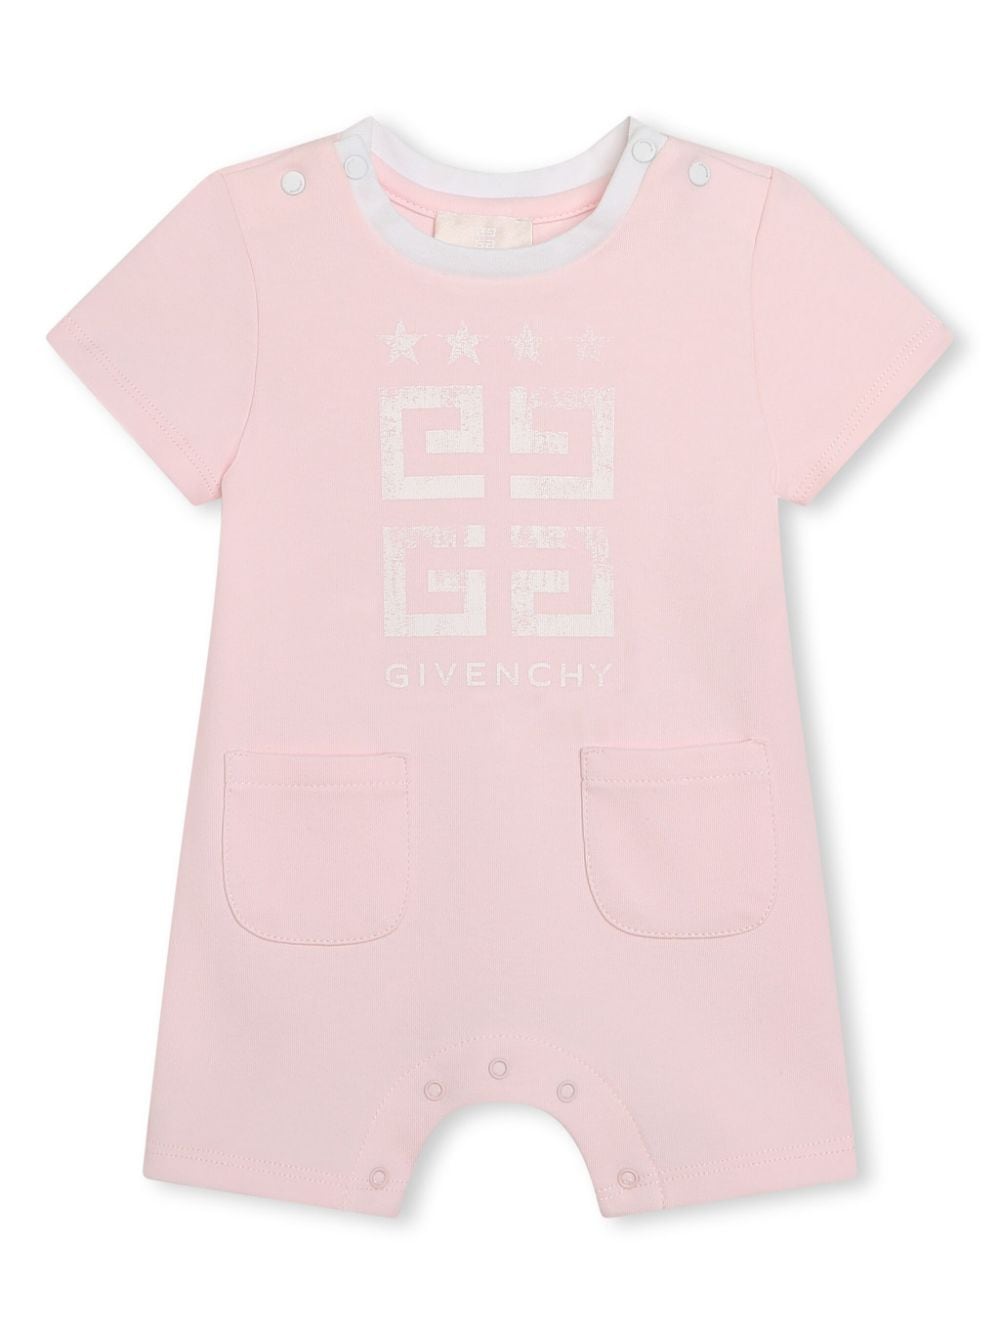 Pink romper for baby girls with logo